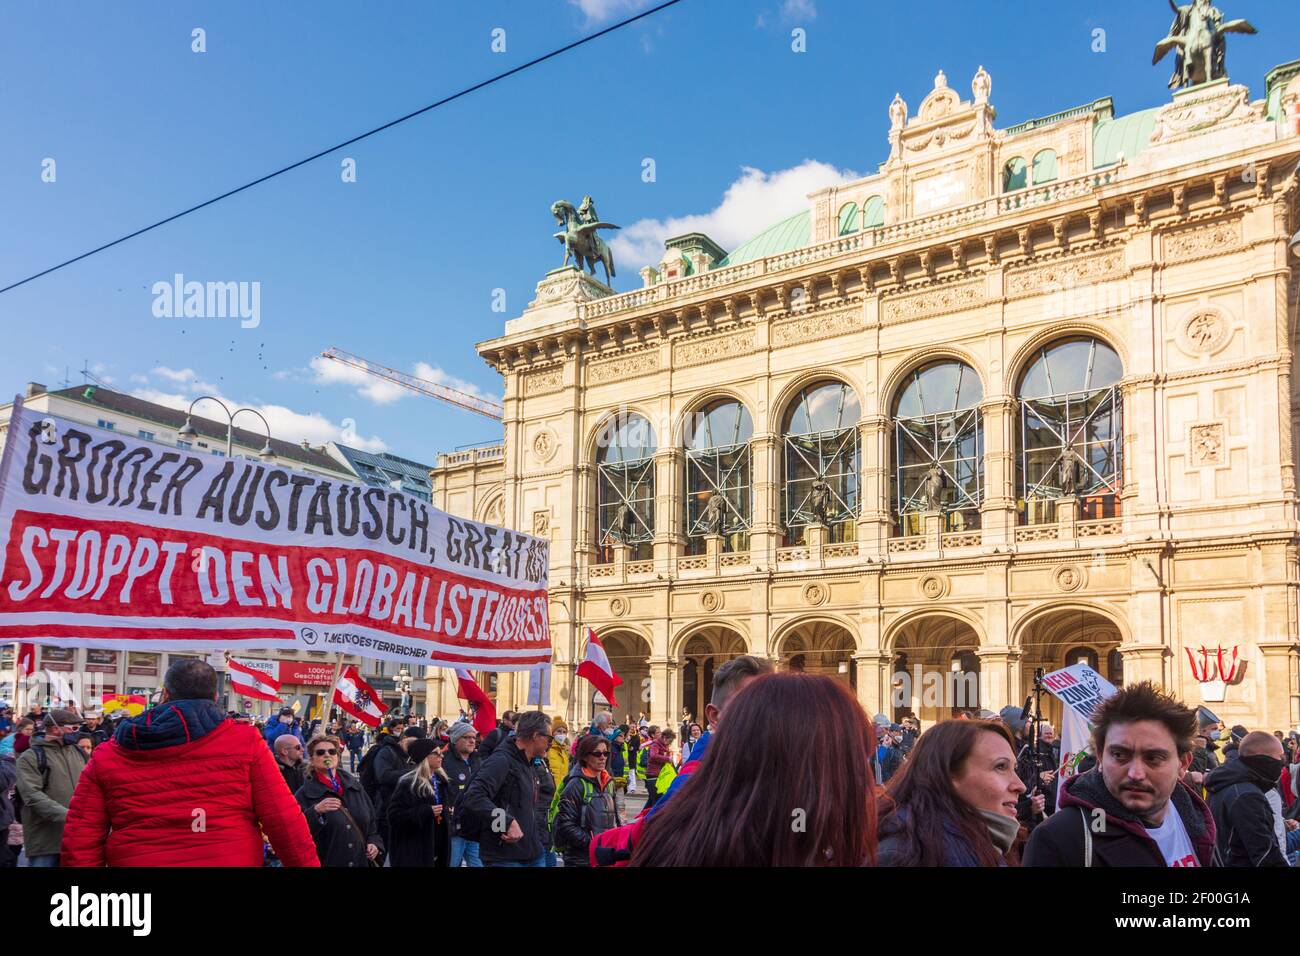 Wien, Vienna: Corona protest demonstration in front of opera Staatsoper, opponents of the corona measures march, banner 'Großer Austausch, Great Reset Stock Photo